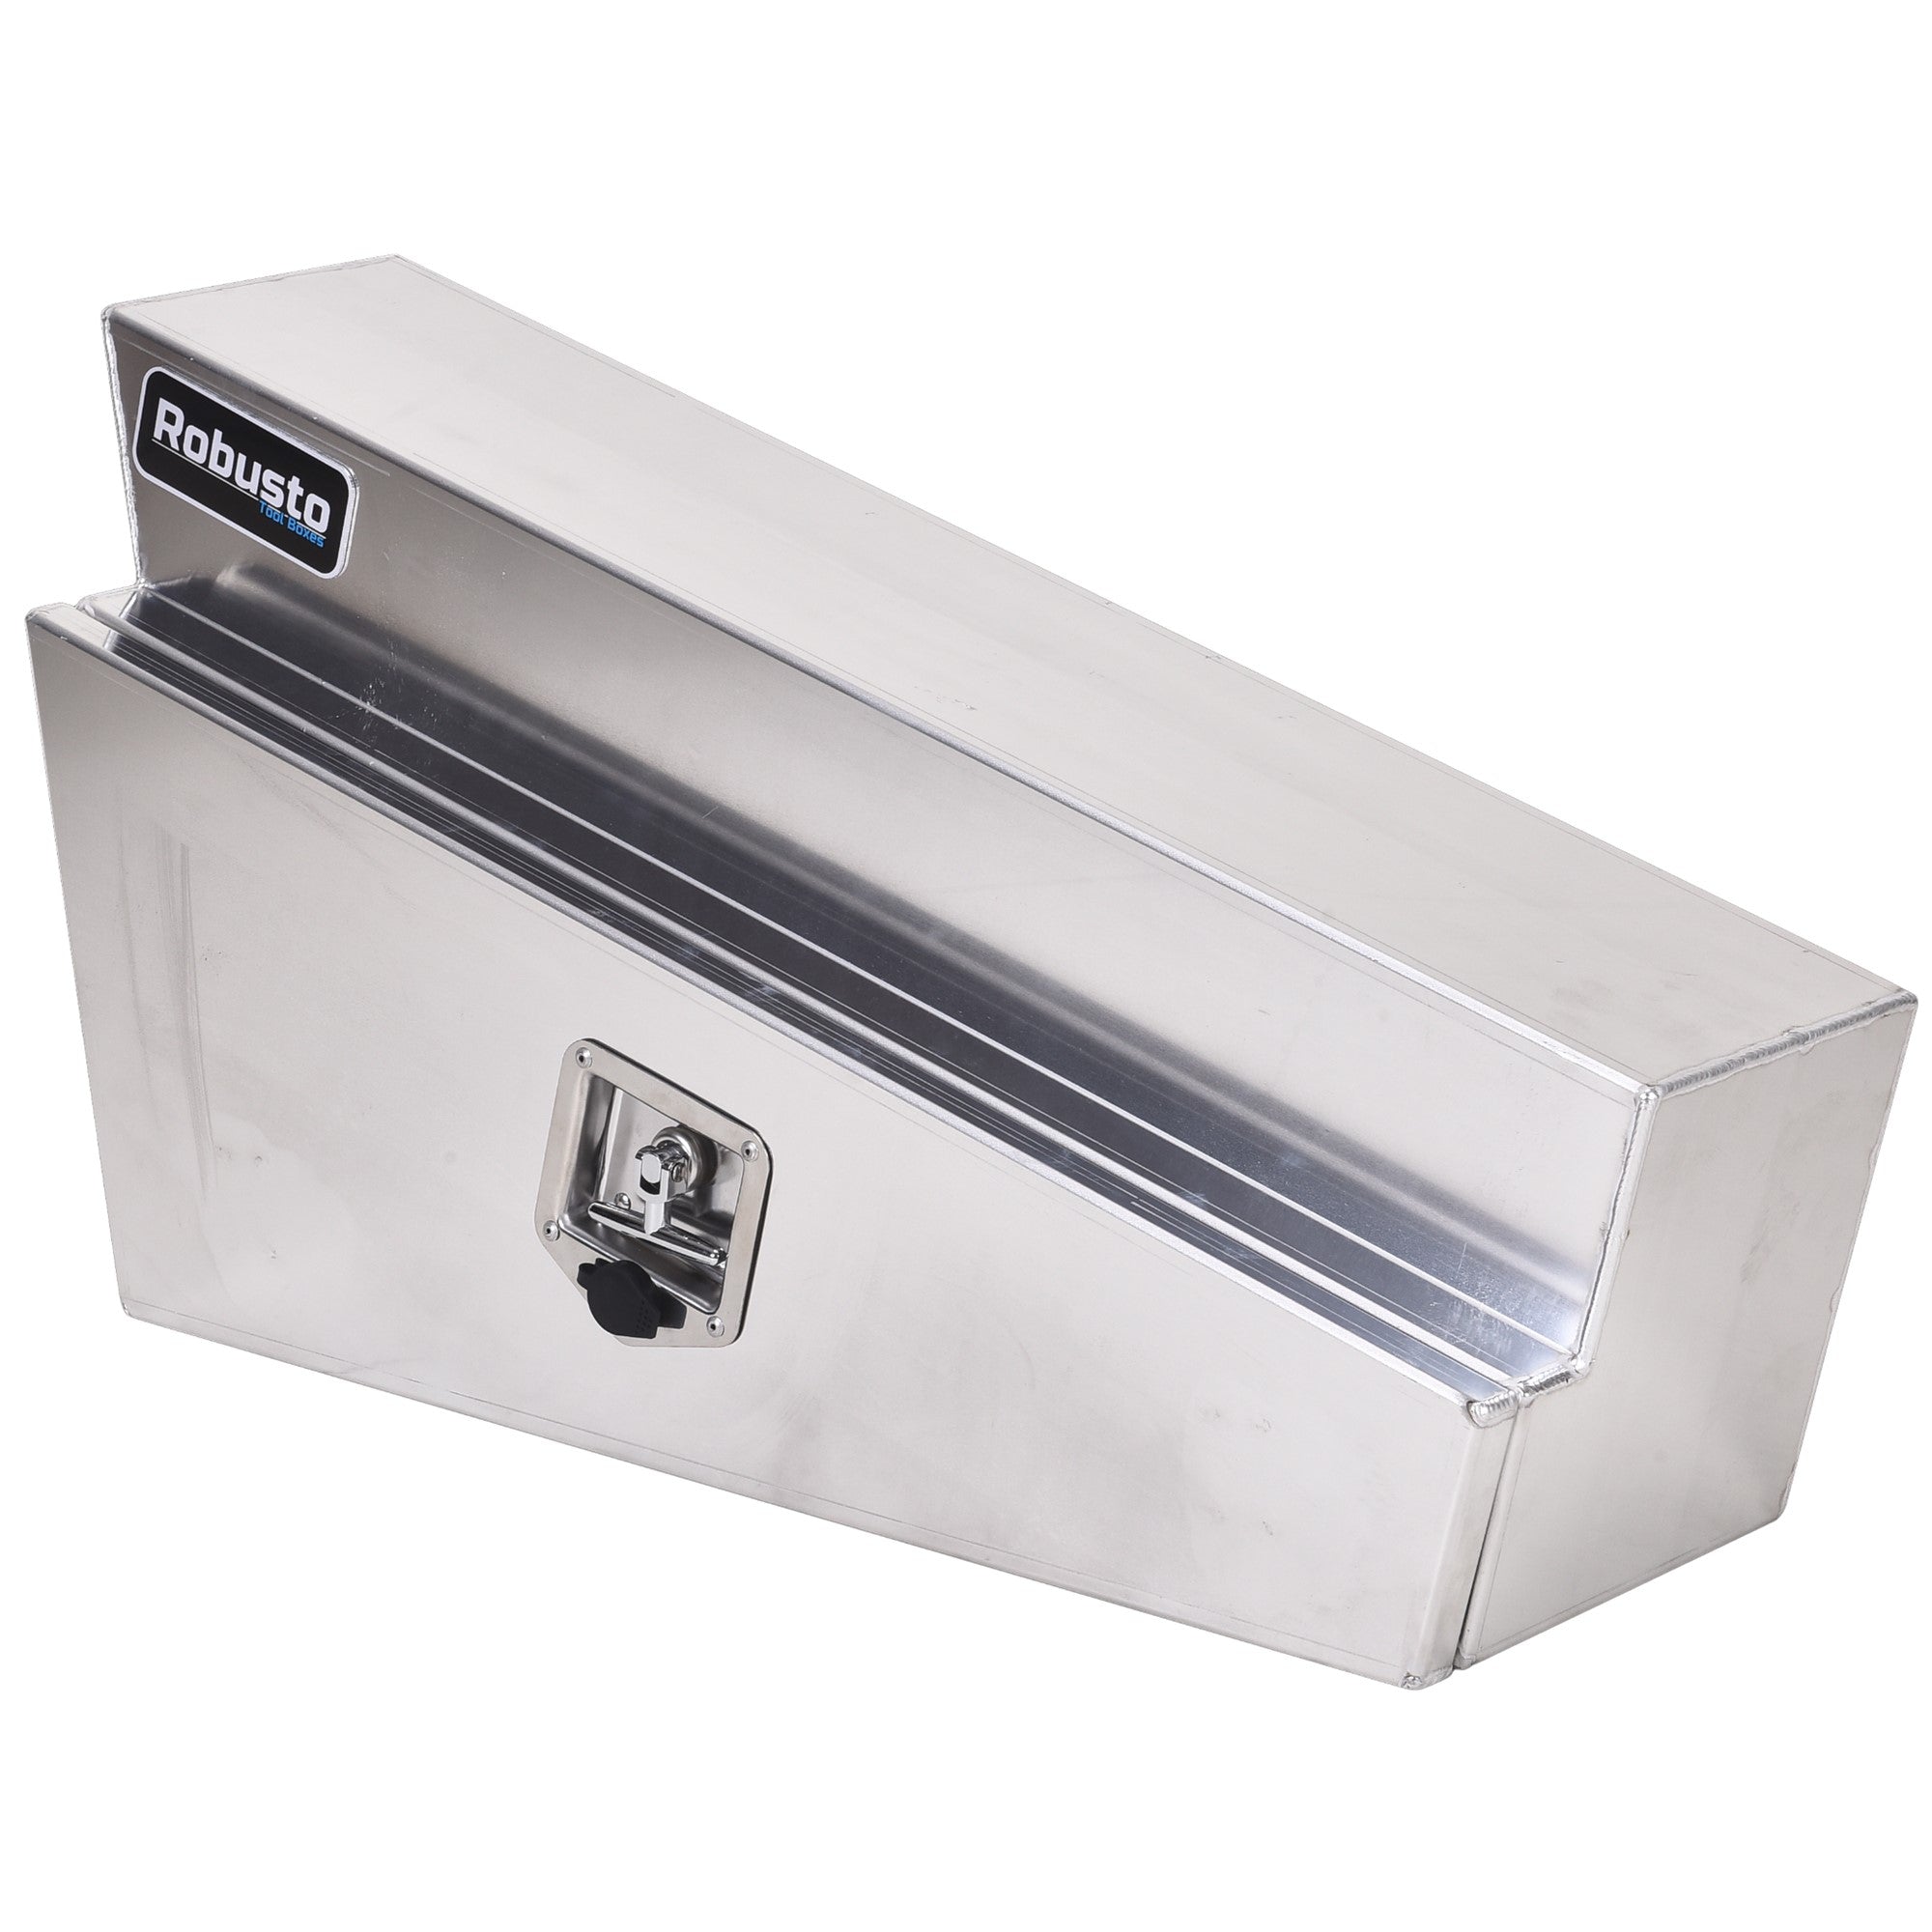 900 x 260 x 400 mm box size Ideal for saving space in the truck bed